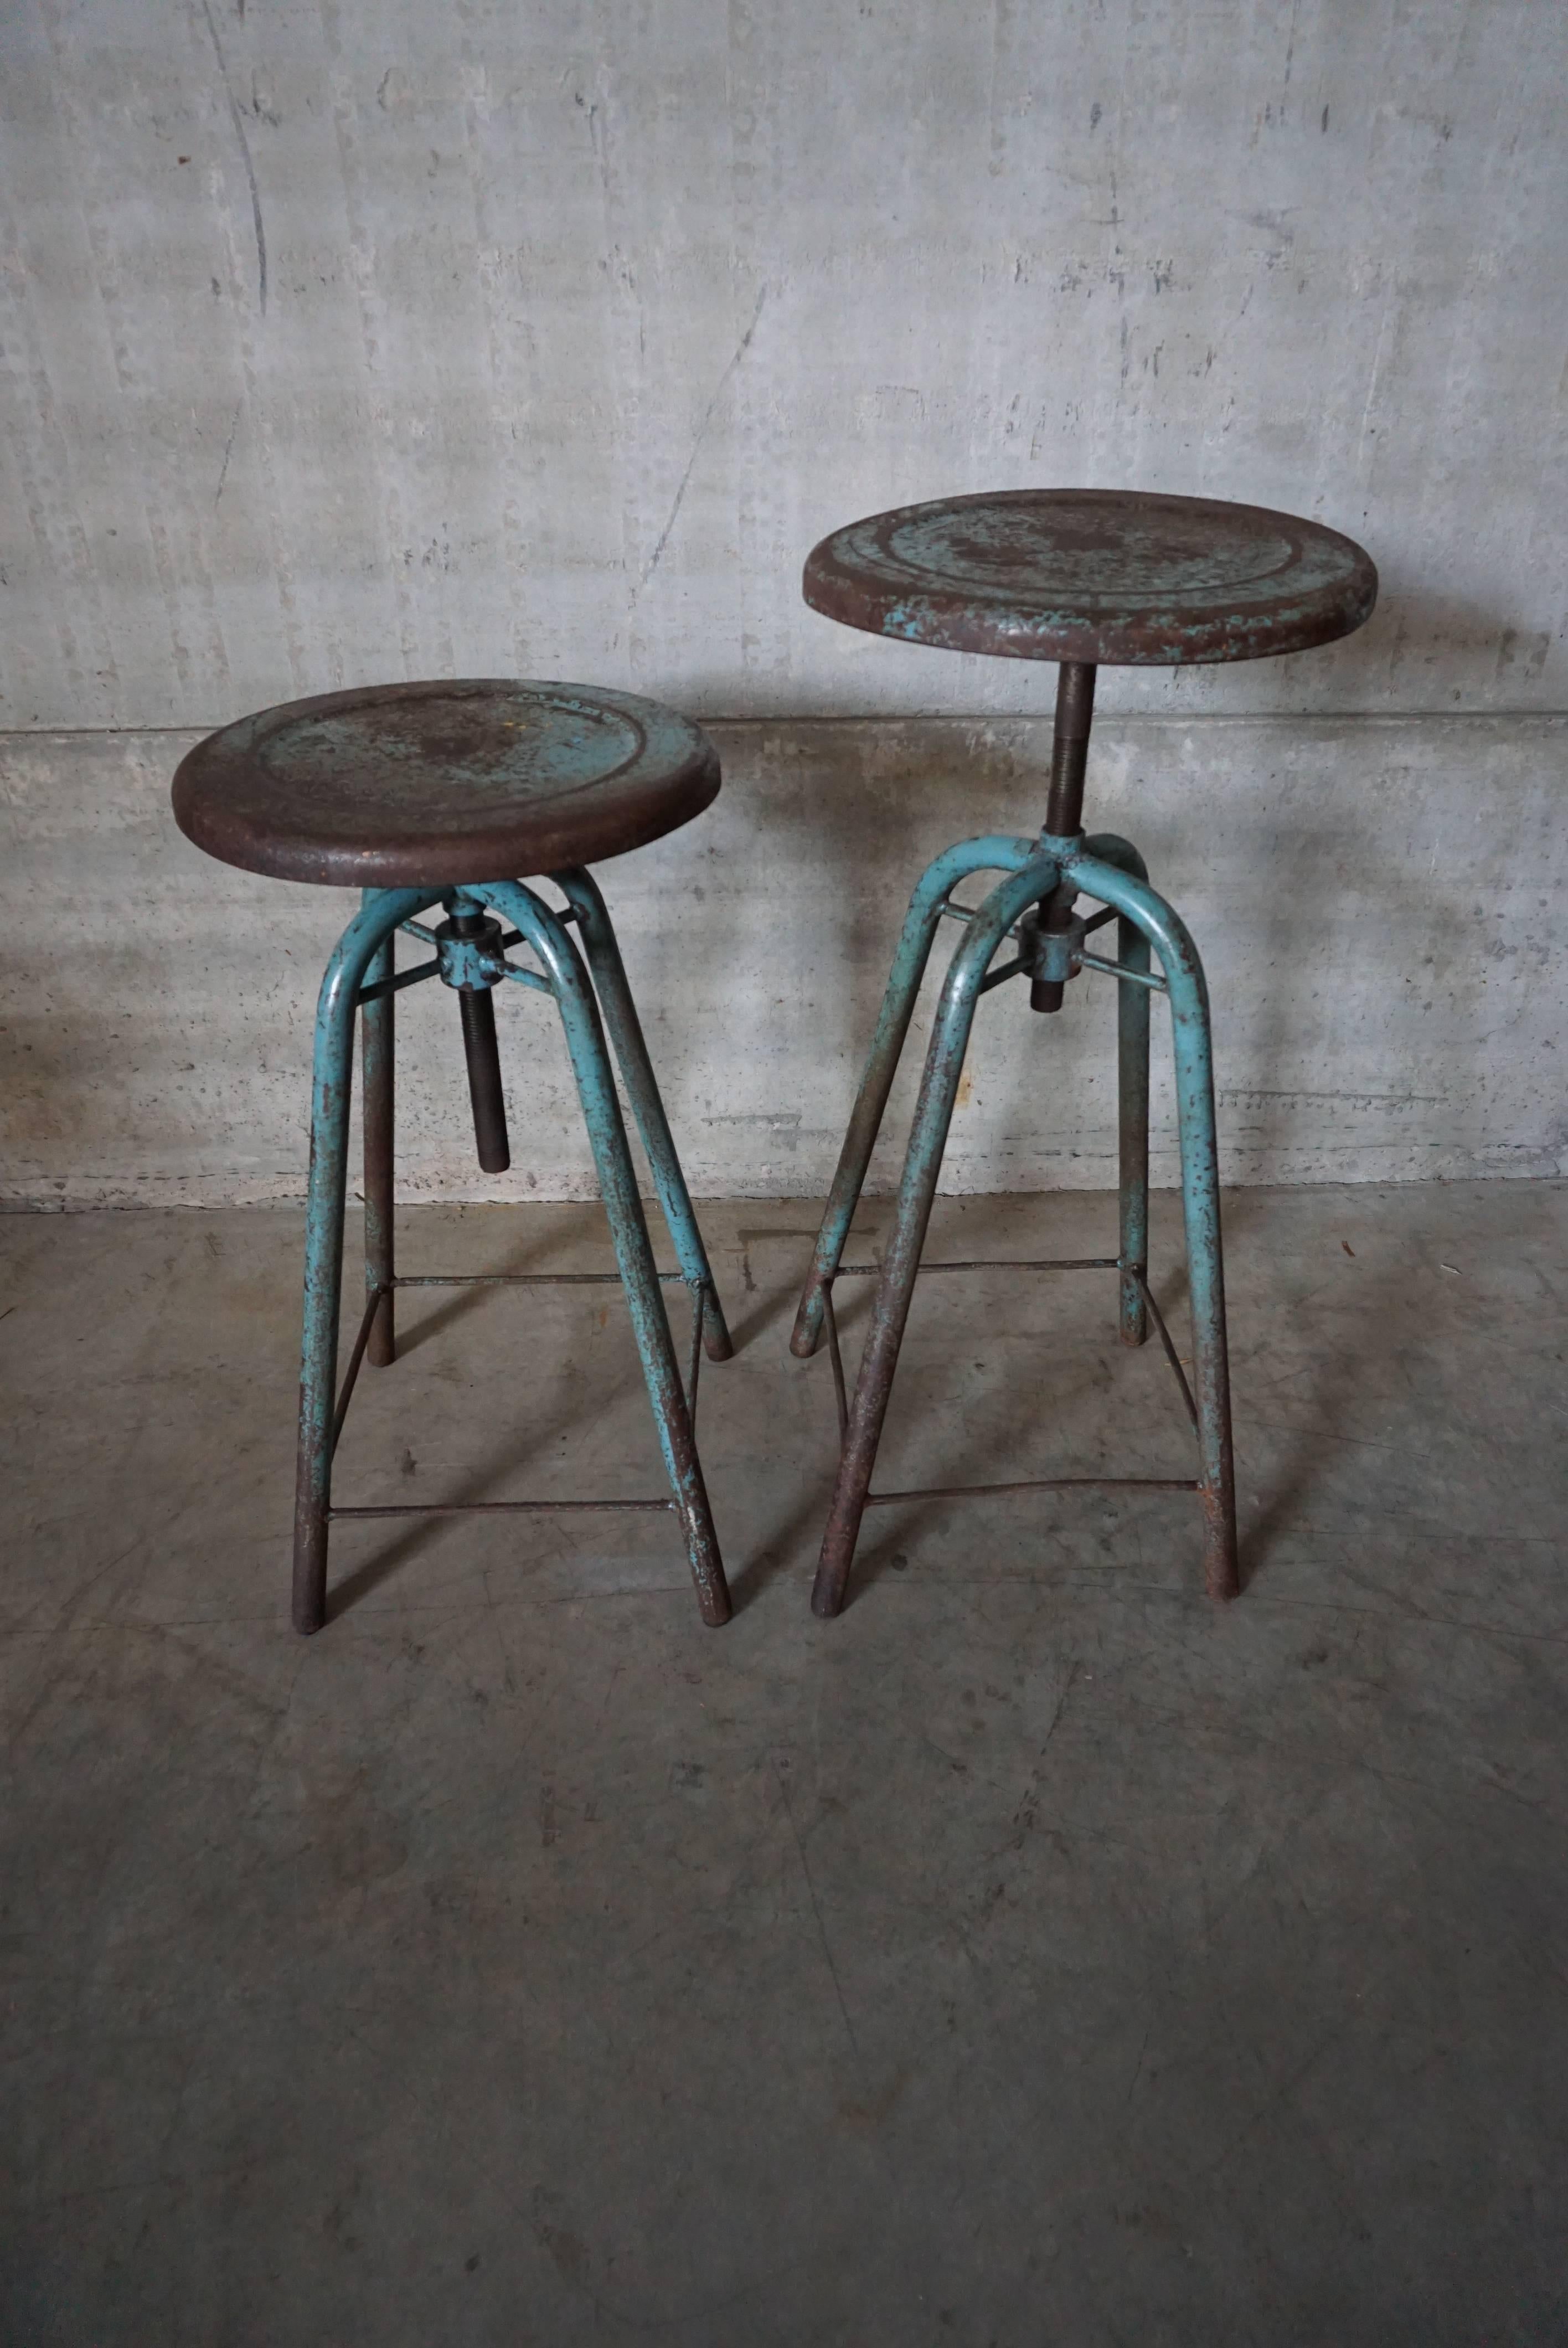 This pair of French Industrial stools were made in France in the 1950s. They feature a metal frame and in height adjustable seat.